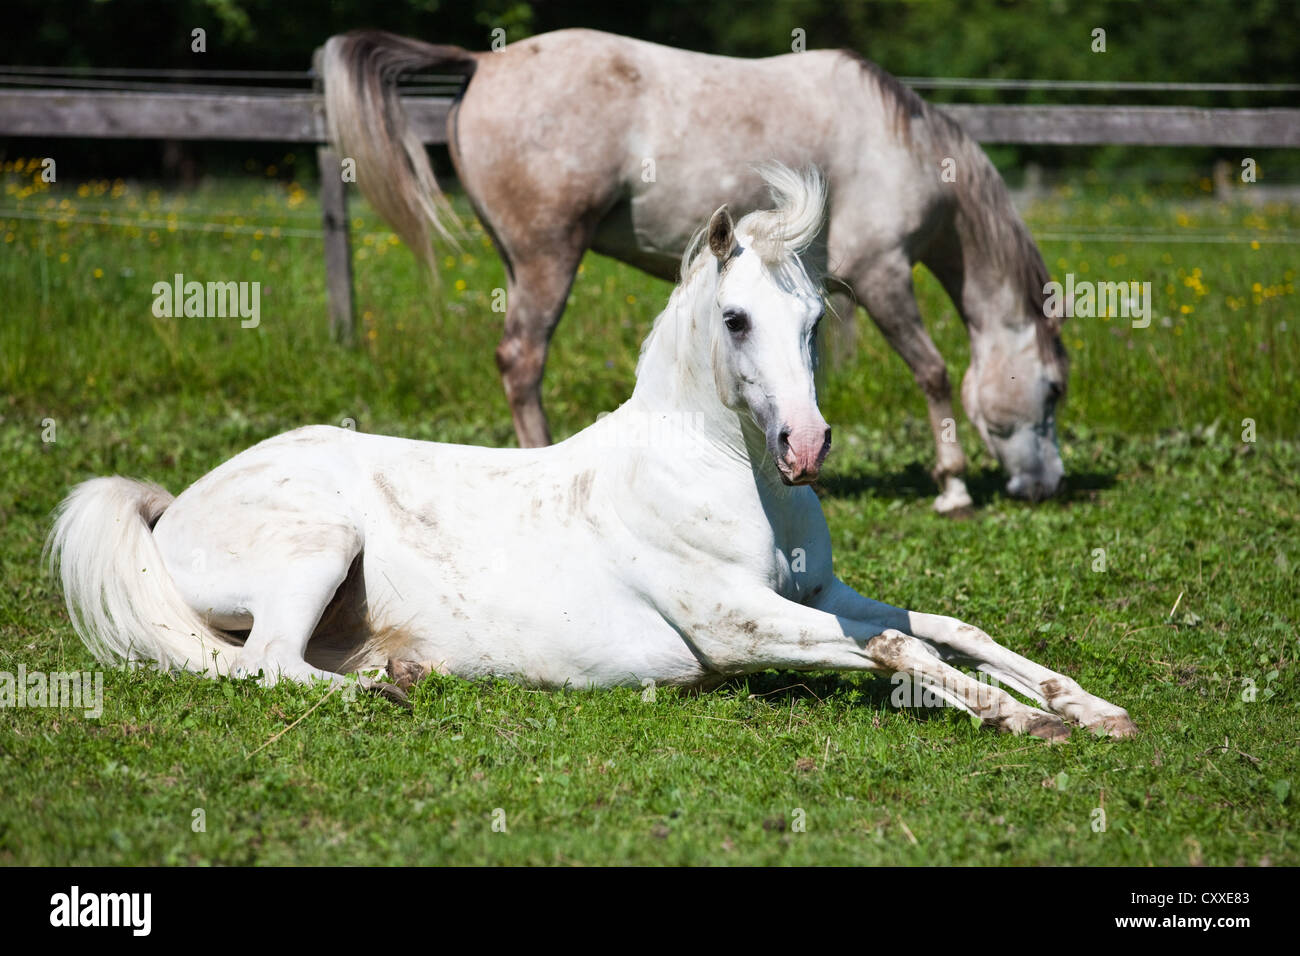 Two gray horses in a paddock, an Arabian mare lying on the grass, North Tyrol, Austria, Europe Stock Photo